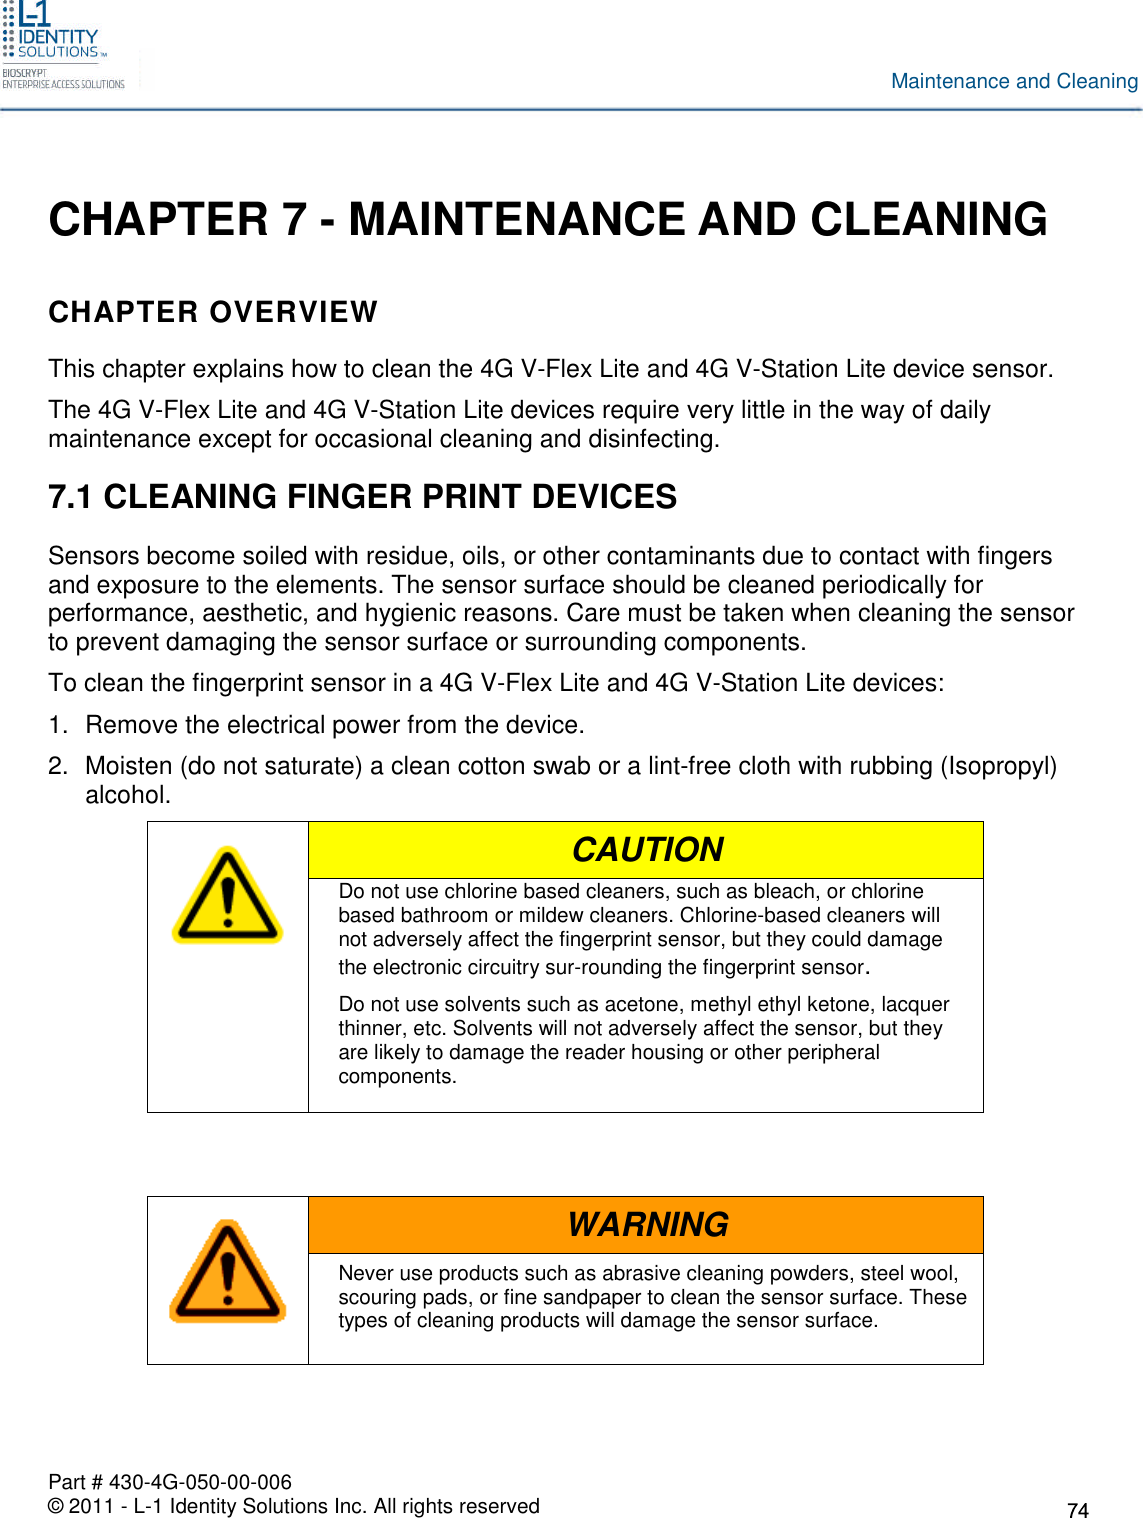 Part # 430-4G-050-00-006© 2011 - L-1 Identity Solutions Inc. All rights reservedMaintenance and CleaningCHAPTER 7 - MAINTENANCE AND CLEANINGCHAPTER OVERVIEWThis chapter explains how to clean the 4G V-Flex Lite and 4G V-Station Lite device sensor.The 4G V-Flex Lite and 4G V-Station Lite devices require very little in the way of dailymaintenance except for occasional cleaning and disinfecting.7.1 CLEANING FINGER PRINT DEVICESSensors become soiled with residue, oils, or other contaminants due to contact with fingersand exposure to the elements. The sensor surface should be cleaned periodically forperformance, aesthetic, and hygienic reasons. Care must be taken when cleaning the sensorto prevent damaging the sensor surface or surrounding components.To clean the fingerprint sensor in a 4G V-Flex Lite and 4G V-Station Lite devices:1. Remove the electrical power from the device.2. Moisten (do not saturate) a clean cotton swab or a lint-free cloth with rubbing (Isopropyl)alcohol.CAUTIONDo not use chlorine based cleaners, such as bleach, or chlorinebased bathroom or mildew cleaners. Chlorine-based cleaners willnot adversely affect the fingerprint sensor, but they could damagethe electronic circuitry sur-rounding the fingerprint sensor.Do not use solvents such as acetone, methyl ethyl ketone, lacquerthinner, etc. Solvents will not adversely affect the sensor, but theyare likely to damage the reader housing or other peripheralcomponents.WARNINGNever use products such as abrasive cleaning powders, steel wool,scouring pads, or fine sandpaper to clean the sensor surface. Thesetypes of cleaning products will damage the sensor surface.